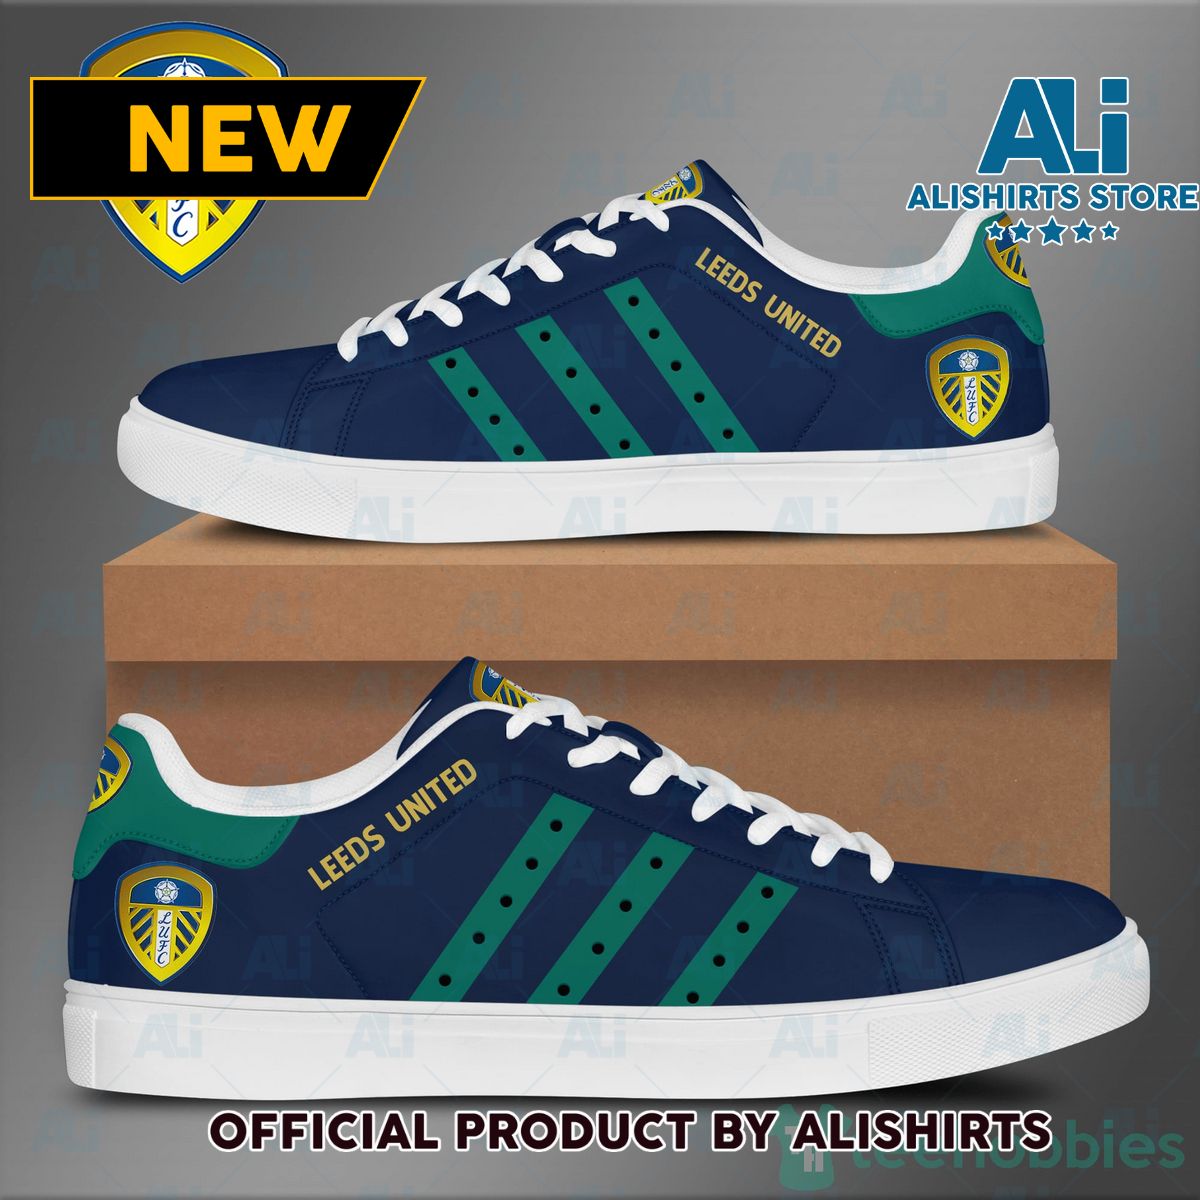 Leeds United F.C Adidas Stan Smith Low Top Skate Shoes